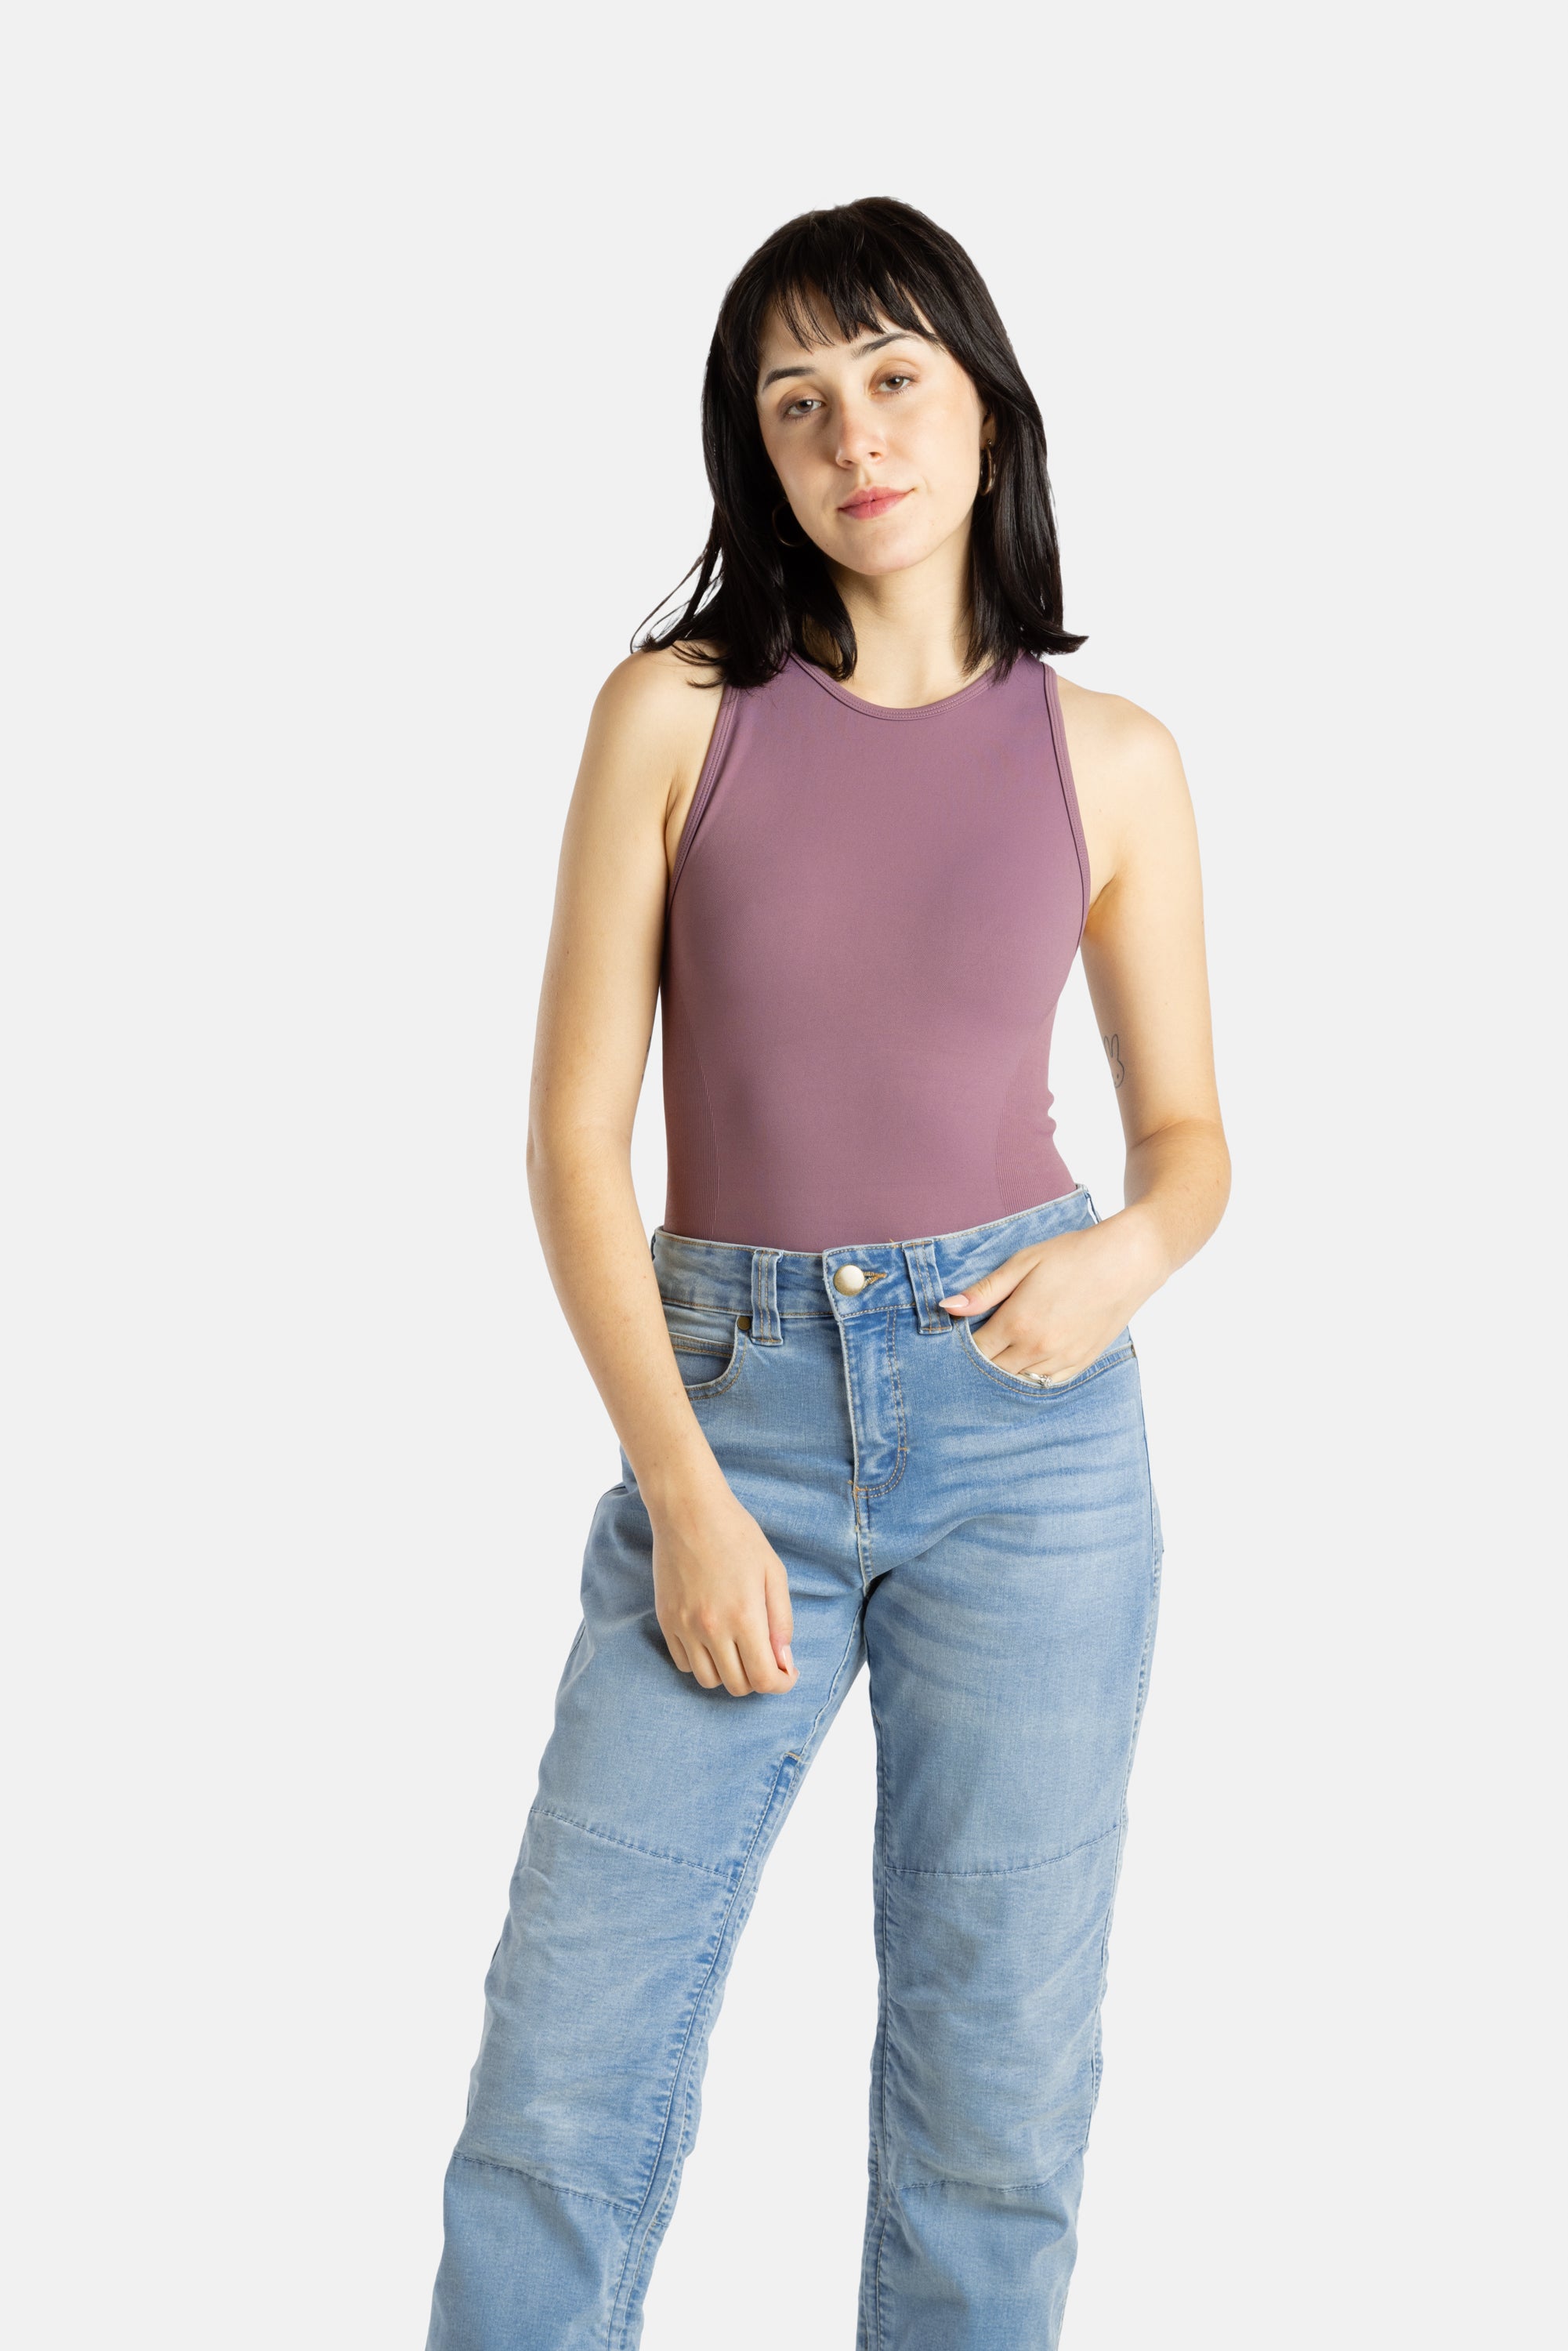 A white woman with long black hair and hoop earrings wears a mauve tank top and denim jeans.